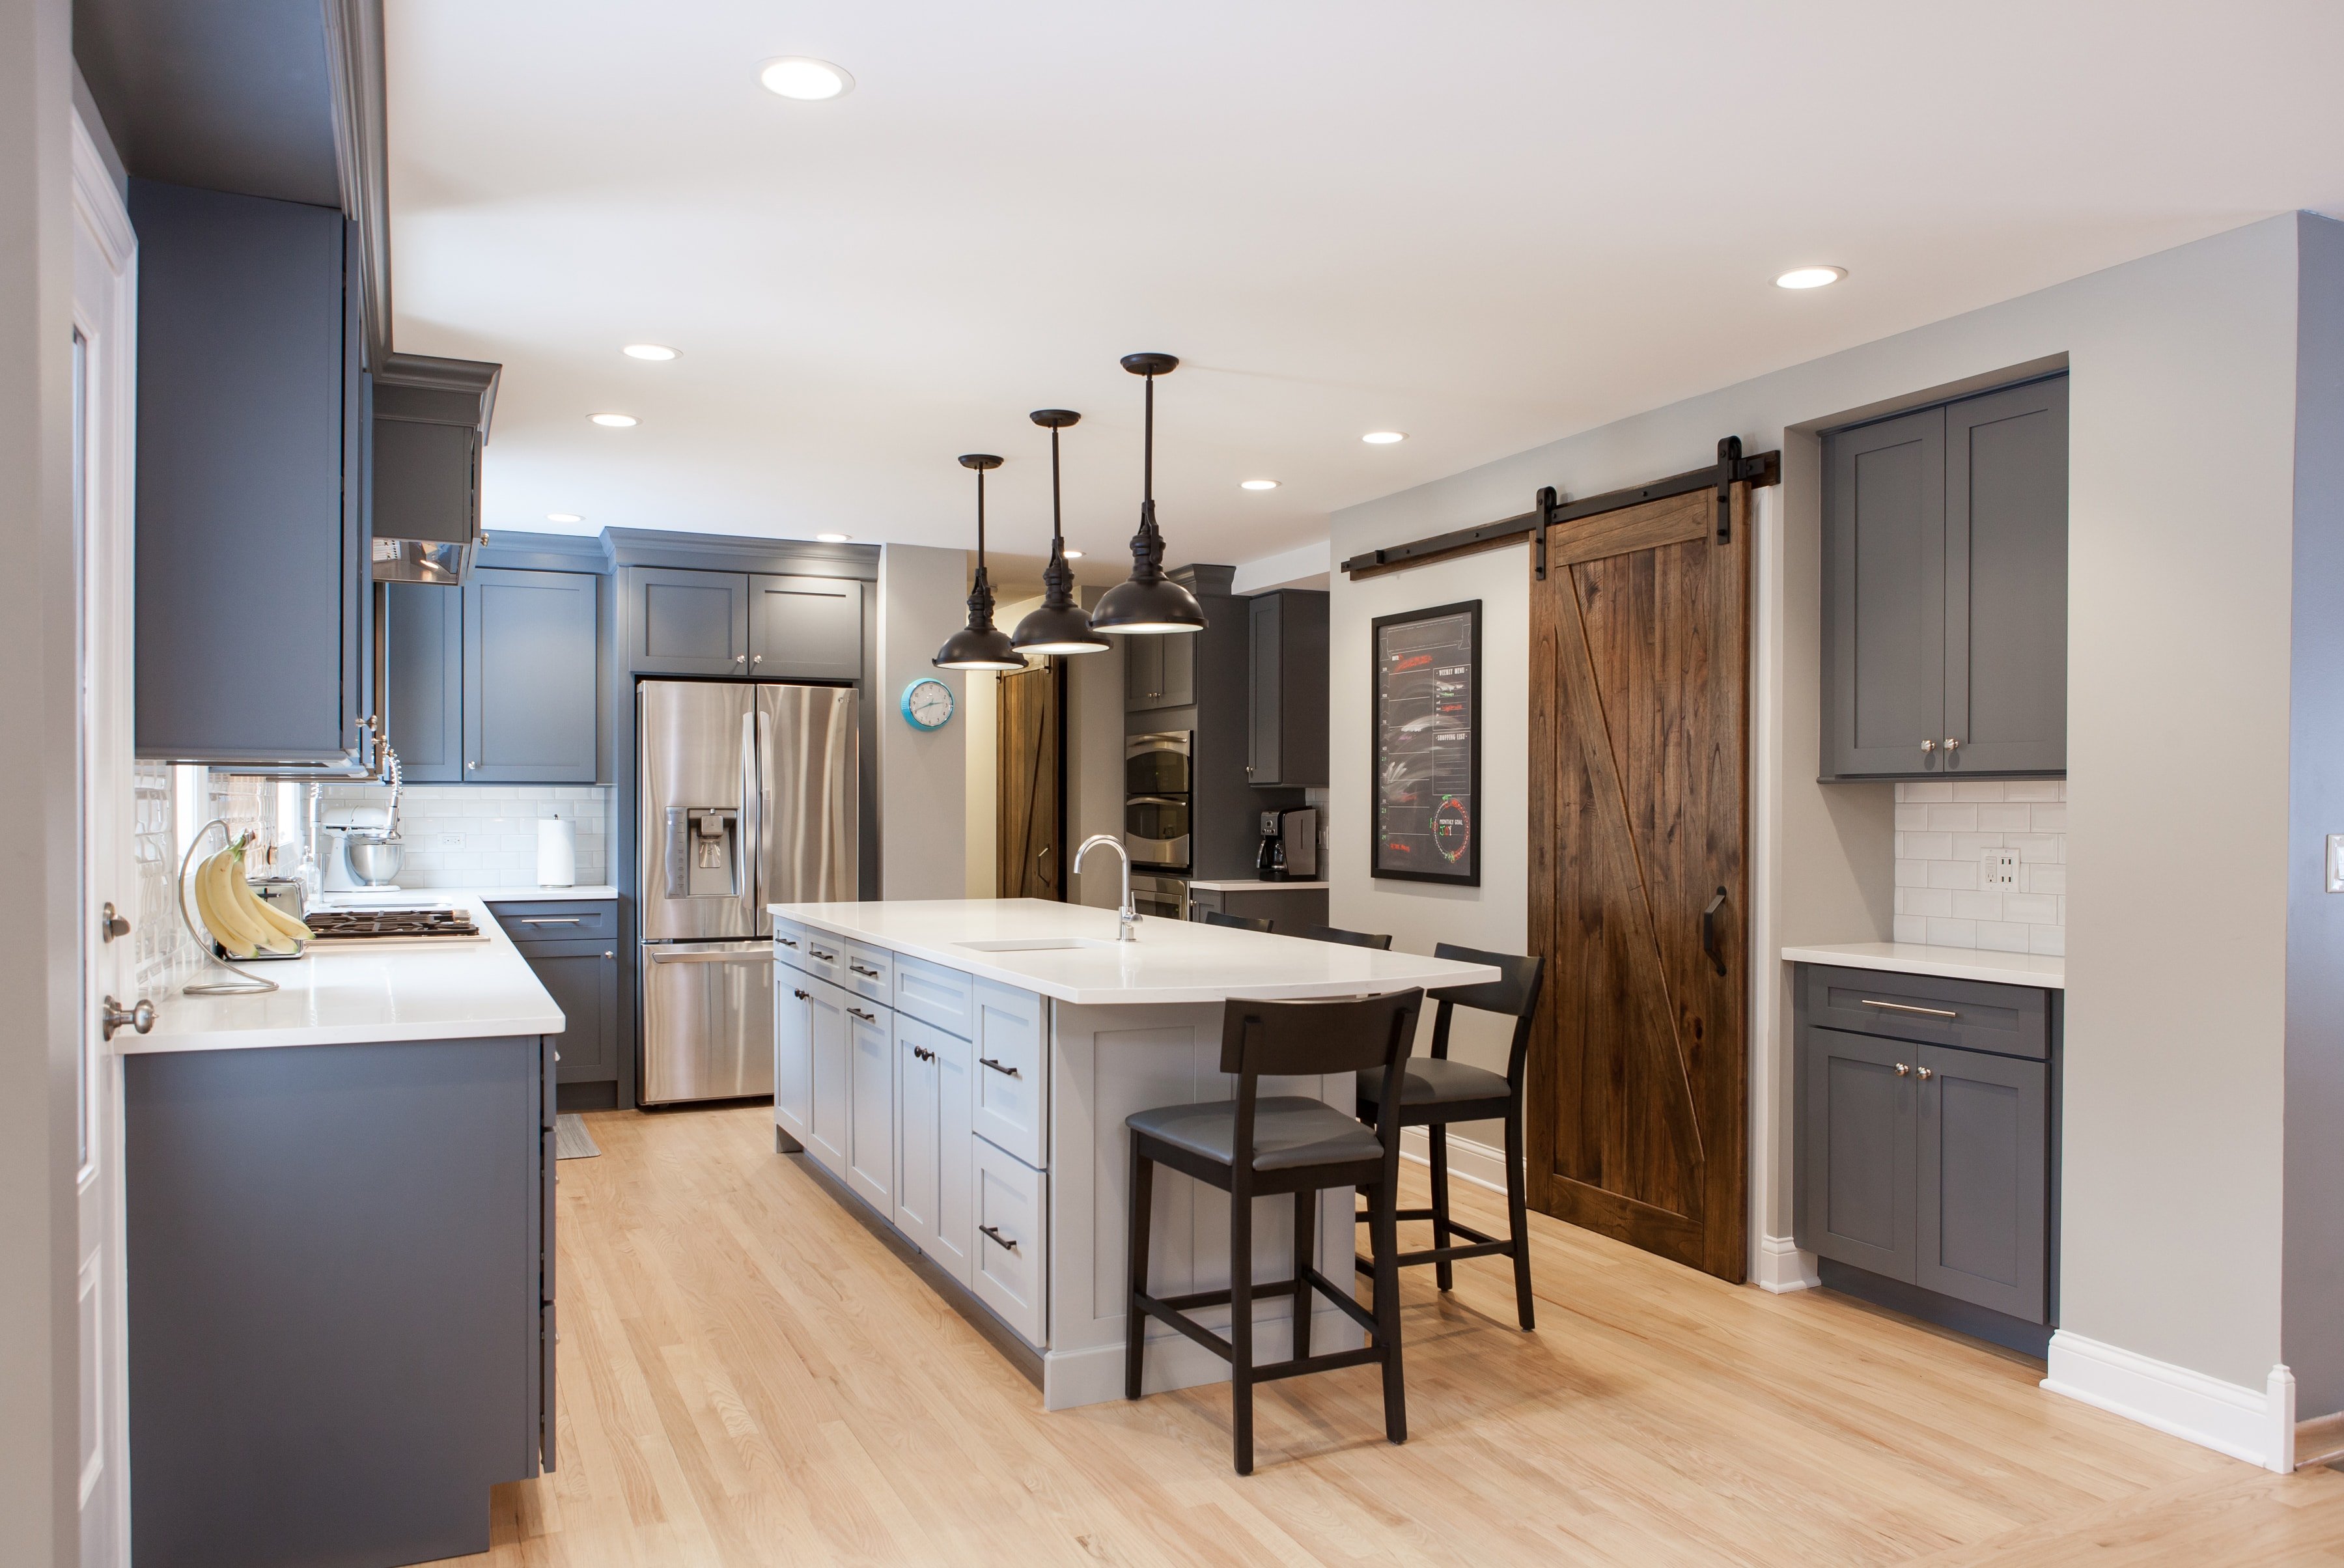 Chicago North Shore Home Remodeling Blog | Chicago Kitchen Remodeling Costs